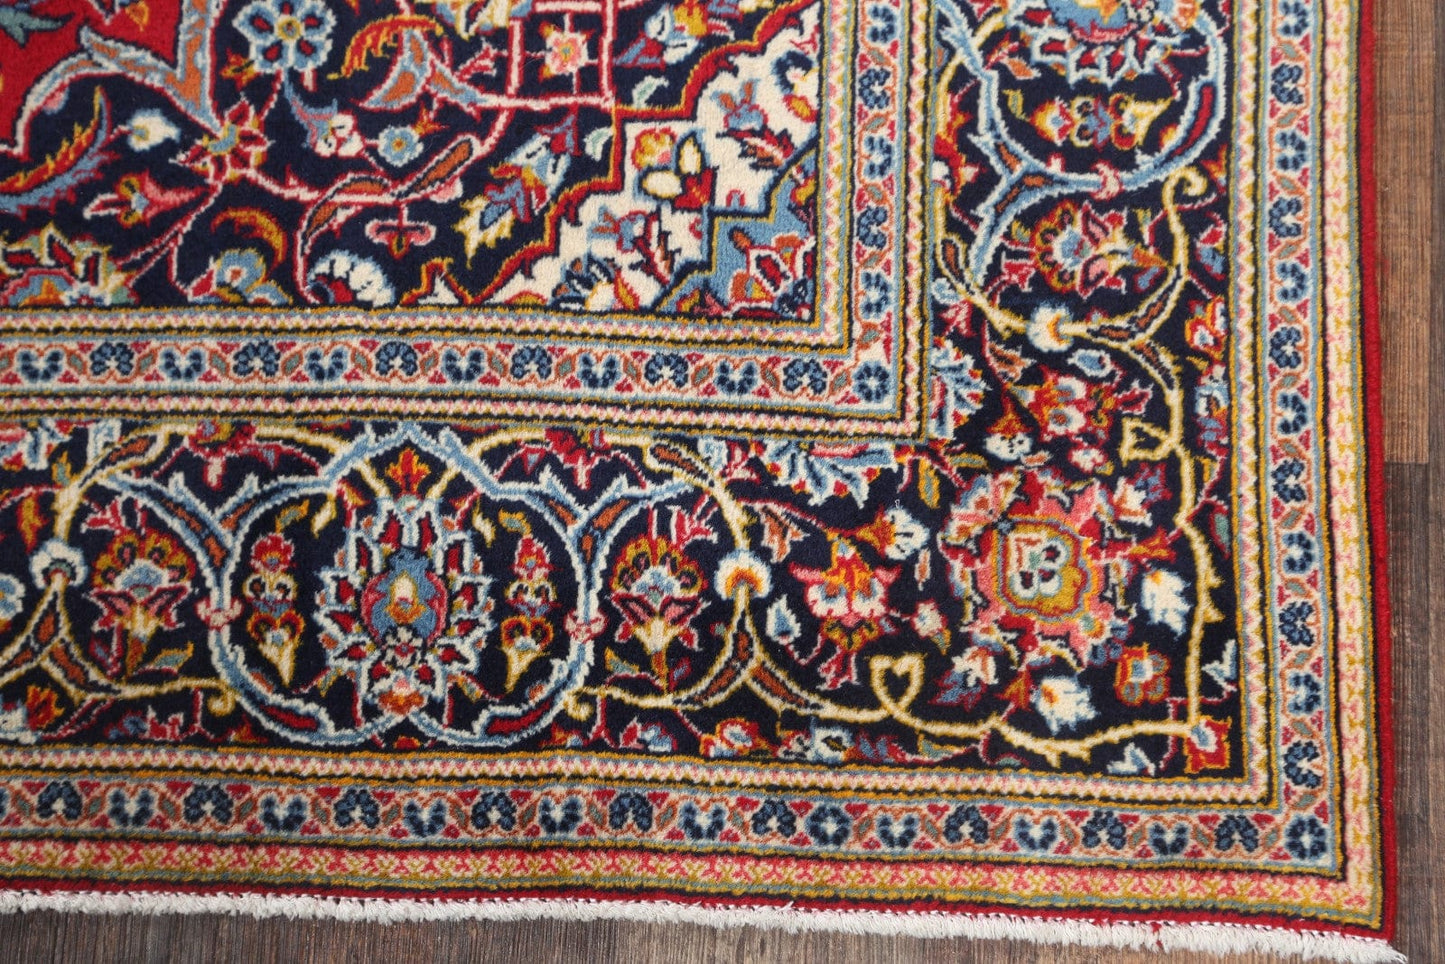 Set of 2 Floral Red Kashan Persian Area Rug 5x7